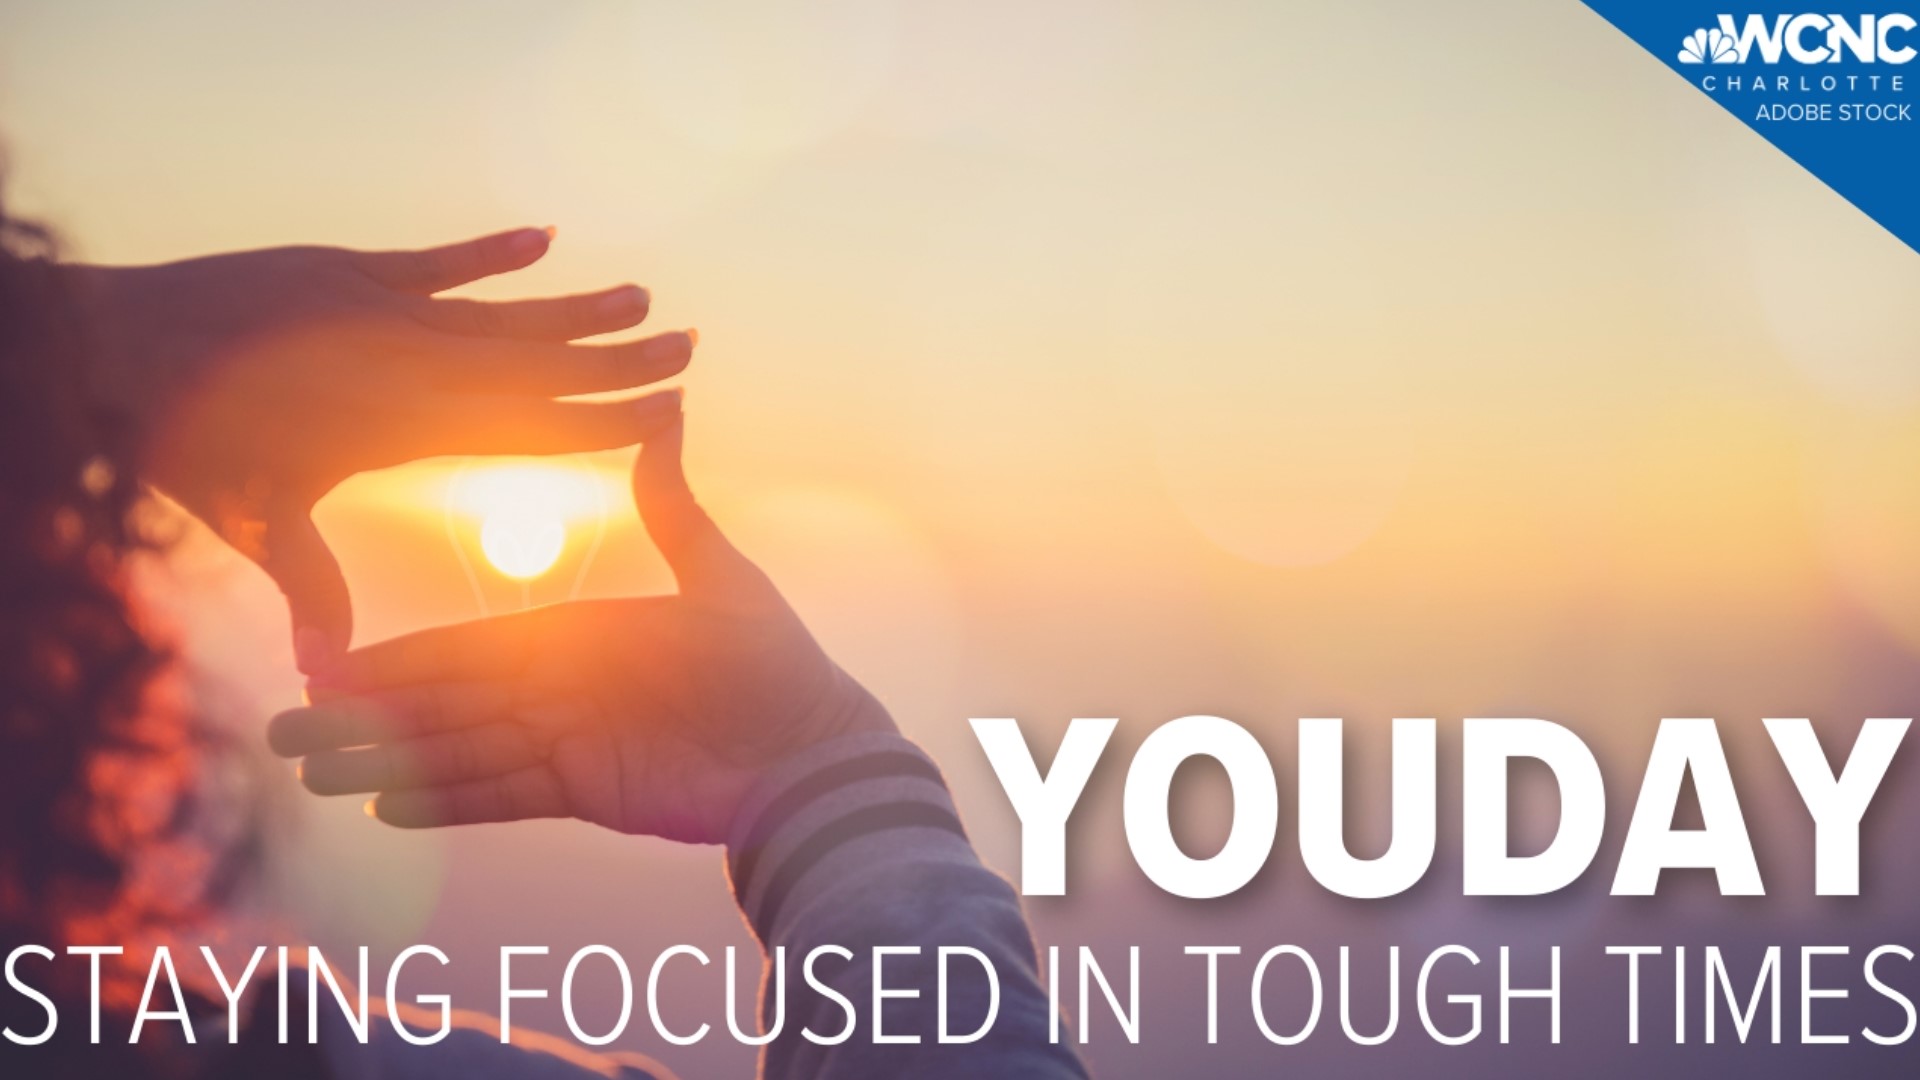 Today on Youday! Coach LaMonte shares how to stay focused, even when times get tough.